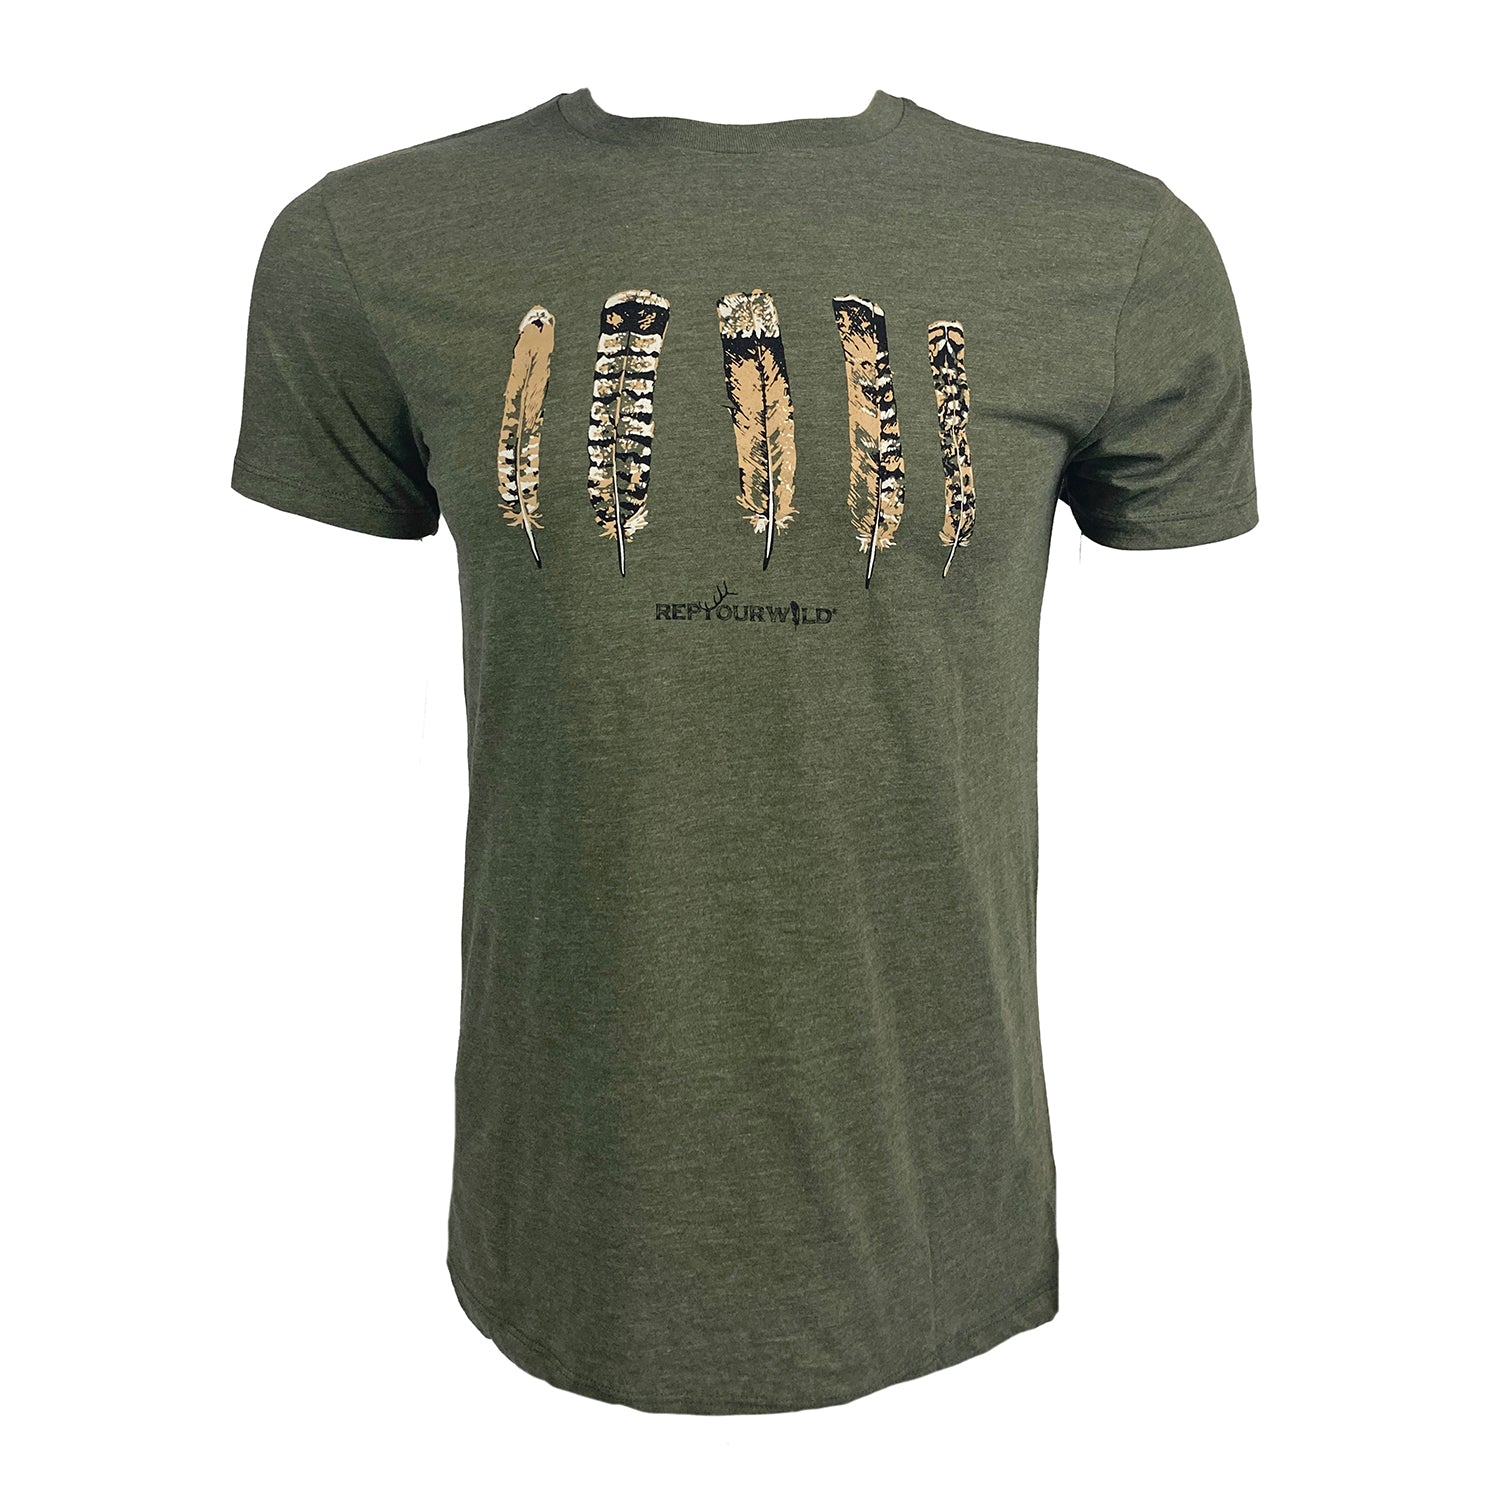 Green tee shown from the front with artistically rendered grouse feathers and Rep Your Wild logo across the chest.